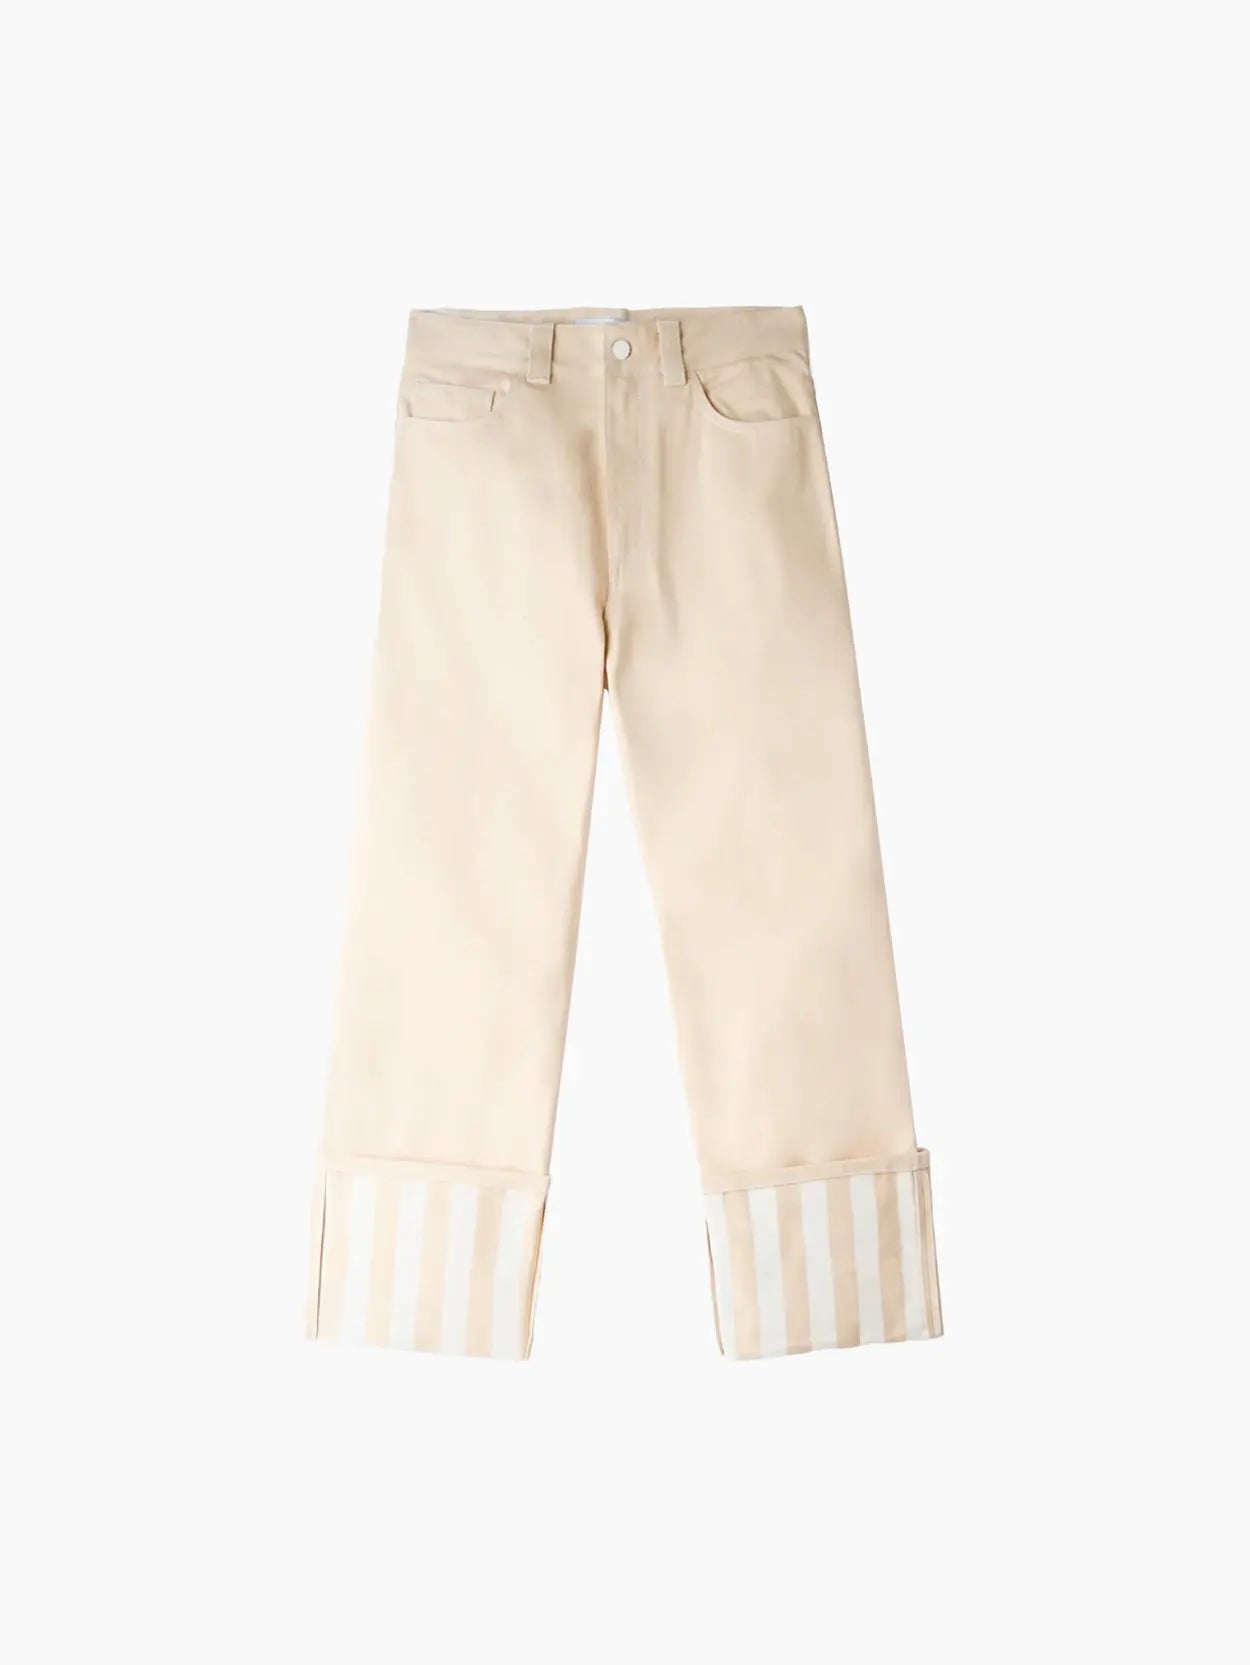 A pair of cream-colored straight-leg jeans with large, wide cuffs at the bottom. The cuffs feature vertical beige and white stripes. The Classic Denim Pants White Stripes by Sunnei, available at Bassalstore in Barcelona, have a classic five-pocket design with a button and zipper closure against a plain white background.